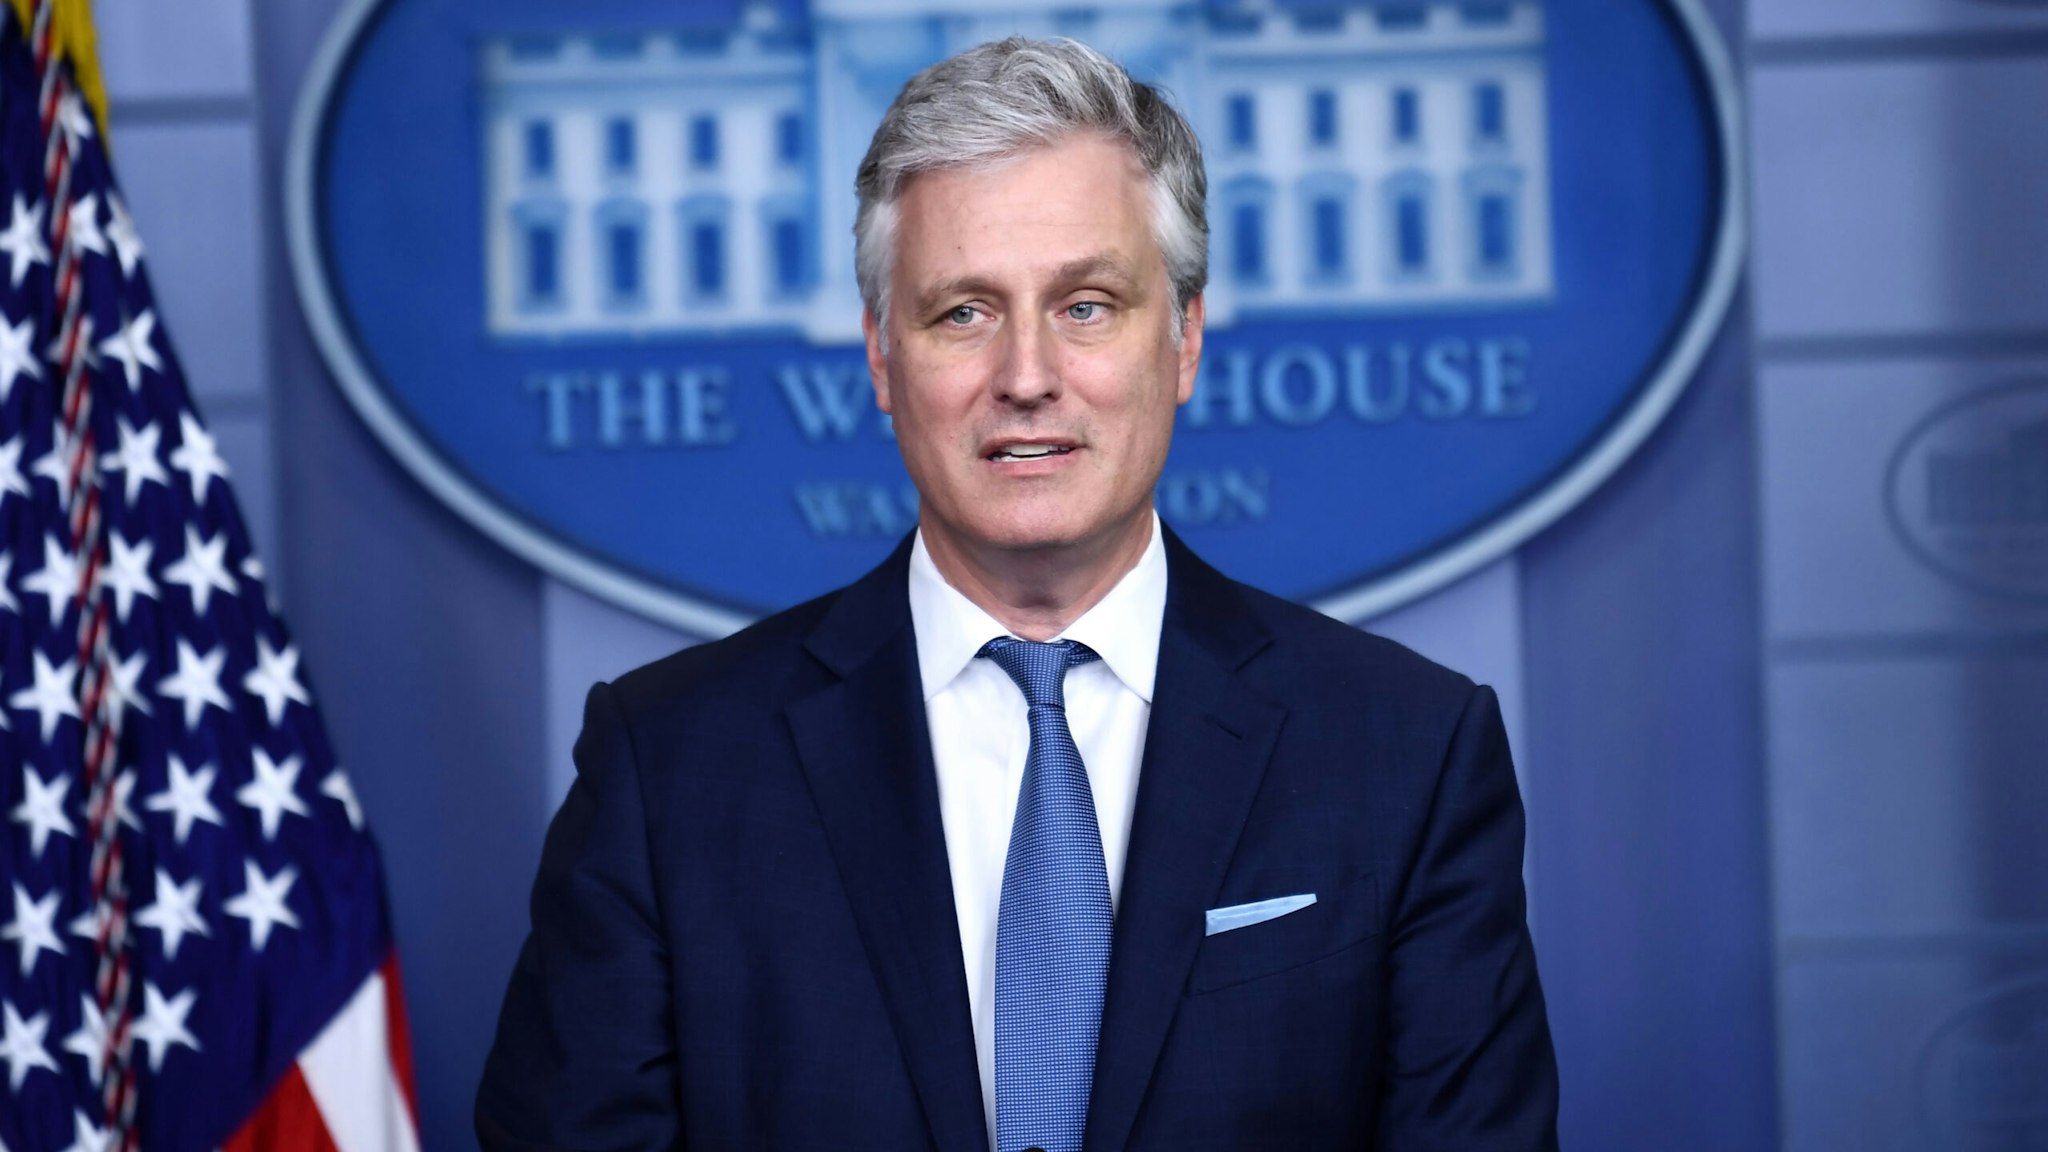 National Security Advisor Robert O'Brien speaks during a press briefing in the James S. Brady Press Briefing Room at the White House, in Washington, DC on August 13, 2020.